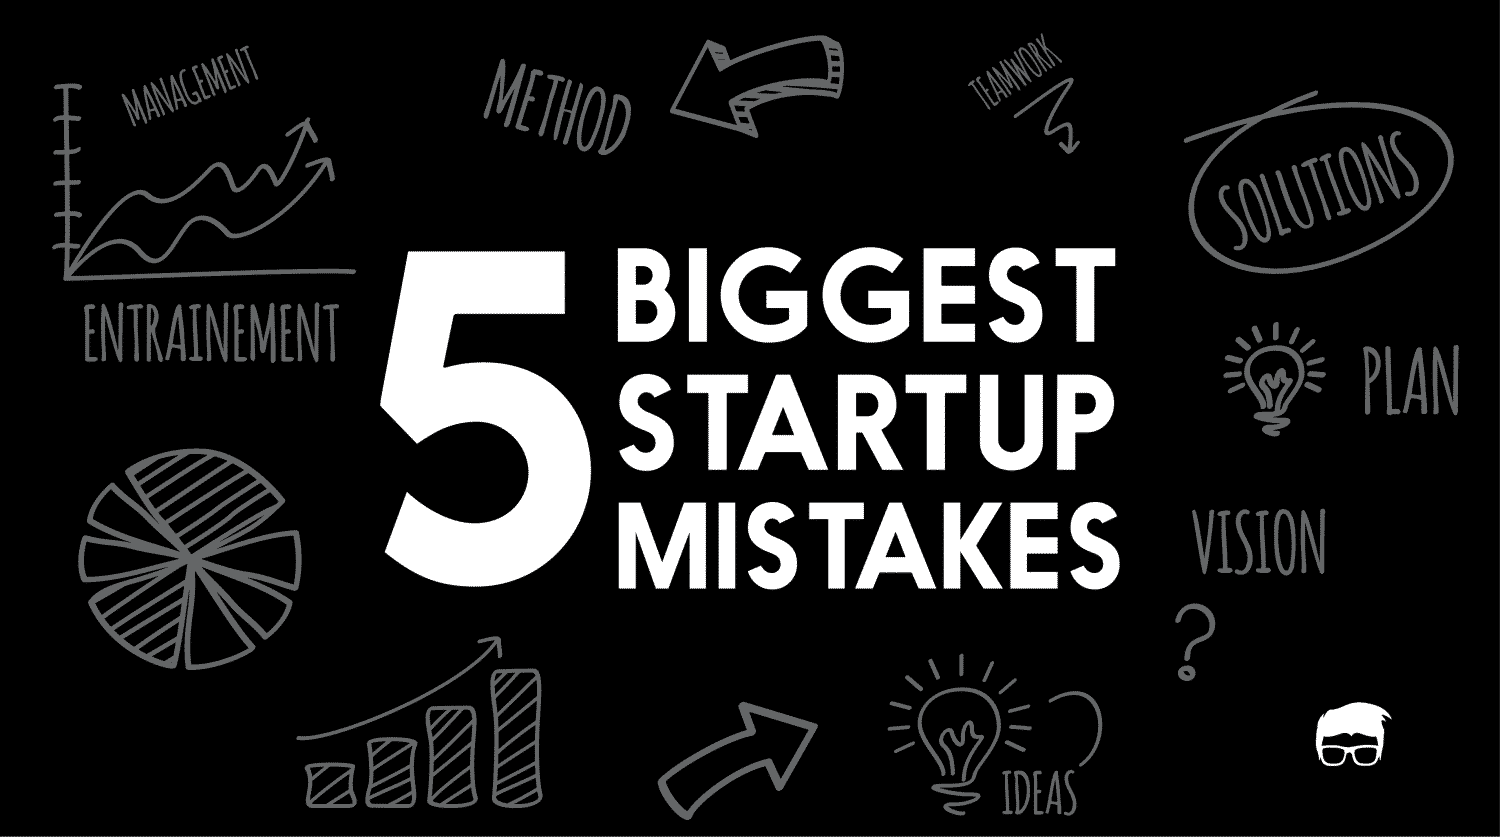 5 Biggest Startup Mistakes And How To Avoid Them